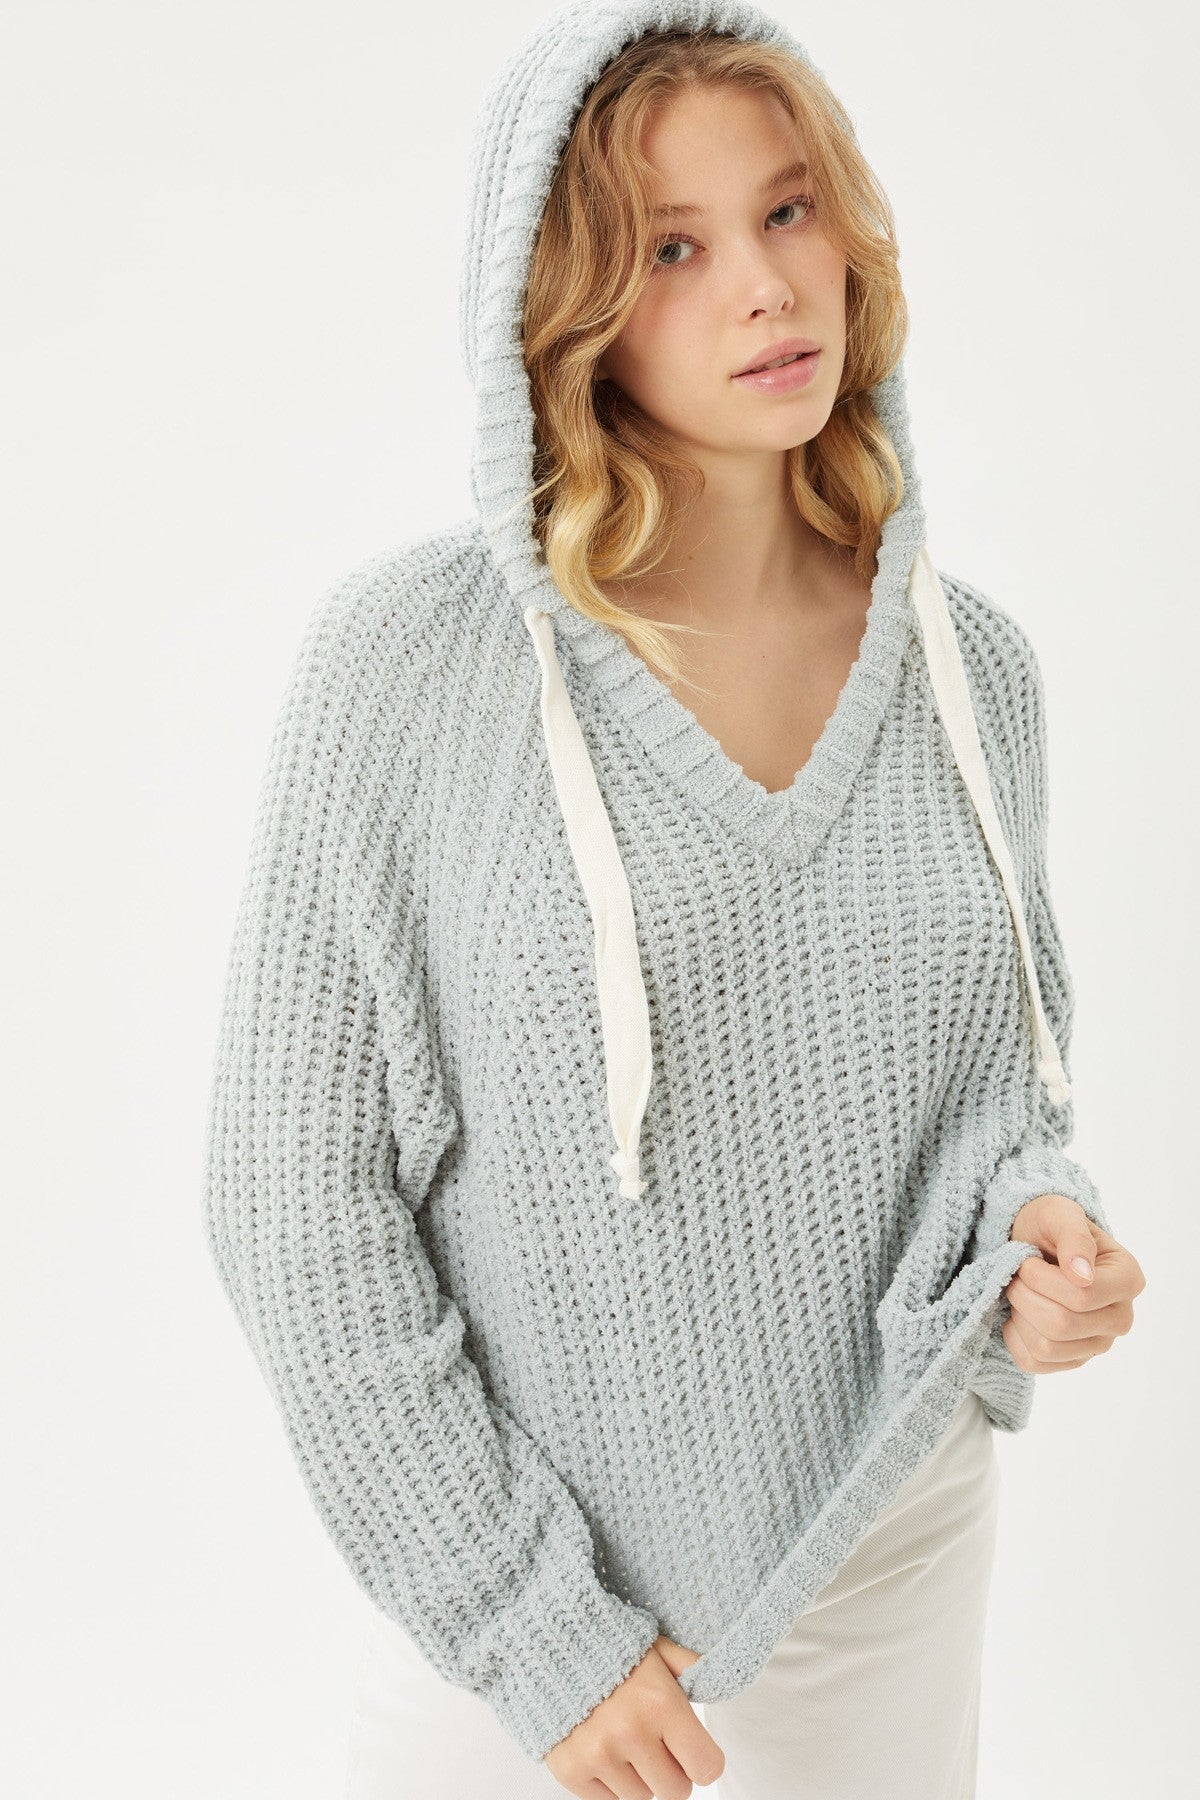 Pullover Hoodie Sweater Top - Love It Clothing